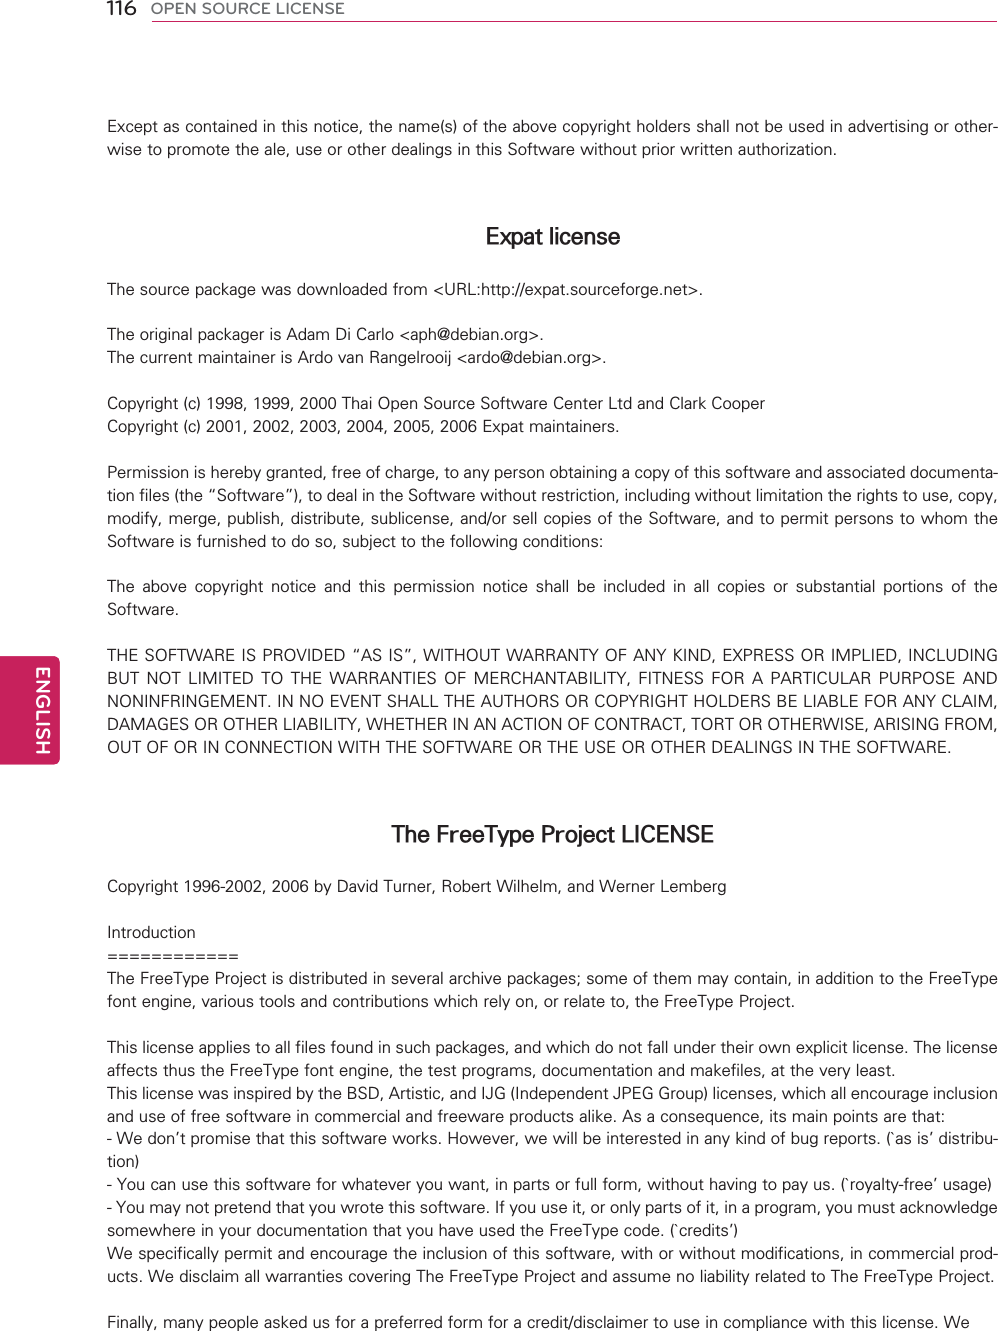 116ENGENGLISHOPEN SOURCE LICENSE                                                                           Except as contained in this notice, the name(s) of the above copyright holders shall not be used in advertising or other-wise to promote the ale, use or other dealings in this Software without prior written authorization.Expat licenseThe source package was downloaded from &lt;URL:http://expat.sourceforge.net&gt;.The original packager is Adam Di Carlo &lt;aph@debian.org&gt;.  The current maintainer is Ardo van Rangelrooij &lt;ardo@debian.org&gt;.Copyright (c) 1998, 1999, 2000 Thai Open Source Software Center Ltd and Clark CooperCopyright (c) 2001, 2002, 2003, 2004, 2005, 2006 Expat maintainers.Permission is hereby granted, free of charge, to any person obtaining a copy of this software and associated documenta-tion files (the “Software”), to deal in the Software without restriction, including without limitation the rights to use, copy, modify, merge, publish, distribute, sublicense, and/or sell copies of the Software, and to permit persons to whom the Software is furnished to do so, subject to the following conditions:The above copyright notice and this permission notice shall be included in all copies or substantial portions of the Software.THE SOFTWARE IS PROVIDED “AS IS”, WITHOUT WARRANTY OF ANY KIND, EXPRESS OR IMPLIED, INCLUDING BUT NOT LIMITED TO THE WARRANTIES OF MERCHANTABILITY, FITNESS FOR A PARTICULAR PURPOSE AND NONINFRINGEMENT. IN NO EVENT SHALL THE AUTHORS OR COPYRIGHT HOLDERS BE LIABLE FOR ANY CLAIM, DAMAGES OR OTHER LIABILITY, WHETHER IN AN ACTION OF CONTRACT, TORT OR OTHERWISE, ARISING FROM, OUT OF OR IN CONNECTION WITH THE SOFTWARE OR THE USE OR OTHER DEALINGS IN THE SOFTWARE.The FreeType Project LICENSECopyright 1996-2002, 2006 by David Turner, Robert Wilhelm, and Werner LembergIntroduction============The FreeType Project is distributed in several archive packages; some of them may contain, in addition to the FreeType font engine, various tools and contributions which rely on, or relate to, the FreeType Project.This license applies to all files found in such packages, and which do not fall under their own explicit license. The license affects thus the FreeType font engine, the test programs, documentation and makefiles, at the very least.This license was inspired by the BSD, Artistic, and IJG (Independent JPEG Group) licenses, which all encourage inclusion and use of free software in commercial and freeware products alike. As a consequence, its main points are that:- We don’t promise that this software works. However, we will be interested in any kind of bug reports. (`as is’ distribu-tion)- You can use this software for whatever you want, in parts or full form, without having to pay us. (`royalty-free’ usage)- You may not pretend that you wrote this software. If you use it, or only parts of it, in a program, you must acknowledge   somewhere in your documentation that you have used the FreeType code. (`credits’)We specifically permit and encourage the inclusion of this software, with or without modifications, in commercial prod-ucts. We disclaim all warranties covering The FreeType Project and assume no liability related to The FreeType Project.Finally, many people asked us for a preferred form for a credit/disclaimer to use in compliance with this license. We 